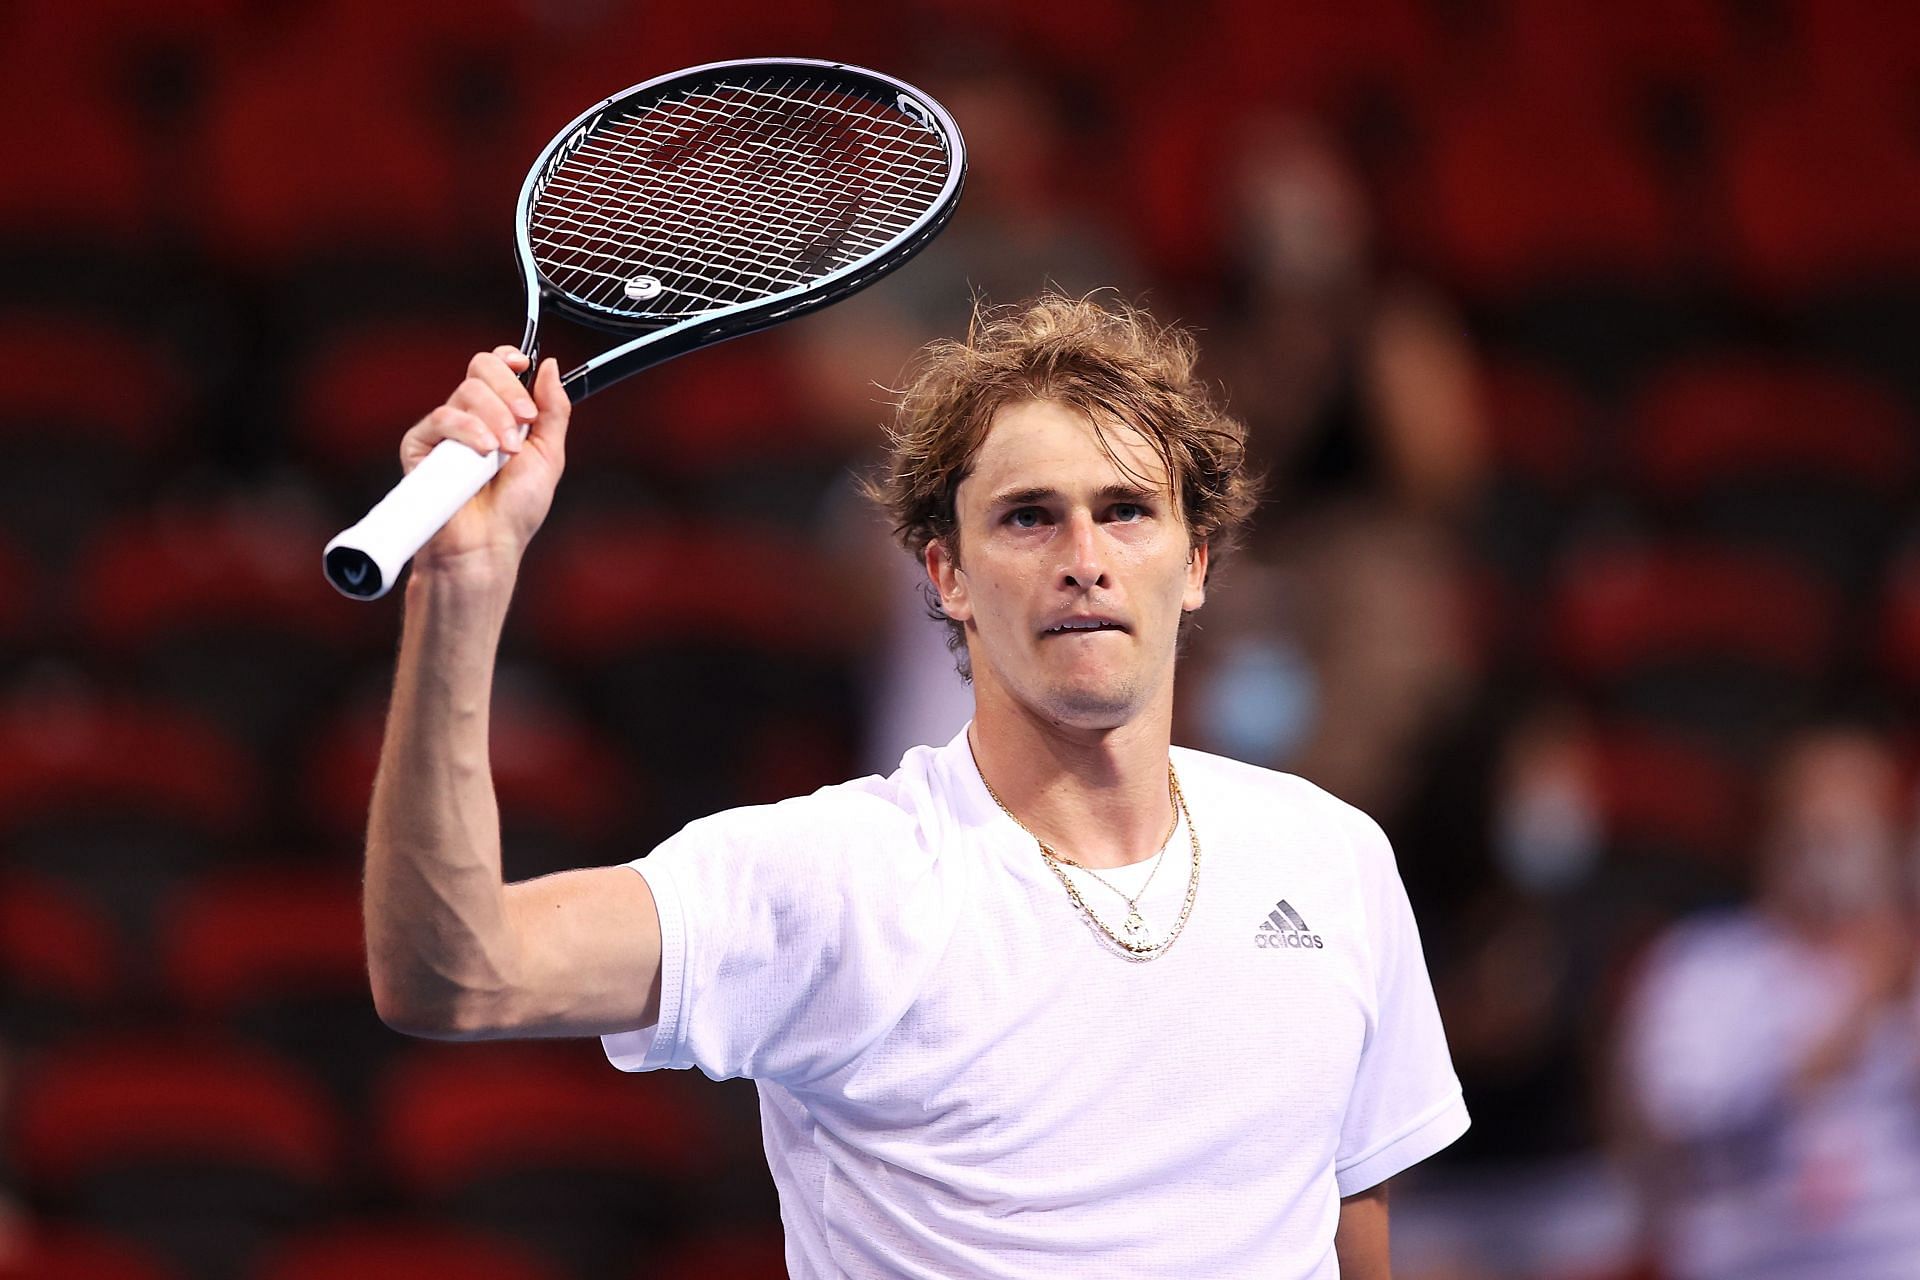 Alexander Zverev beat Cameron Norrie in straight sets at the 2022 ATP Cup